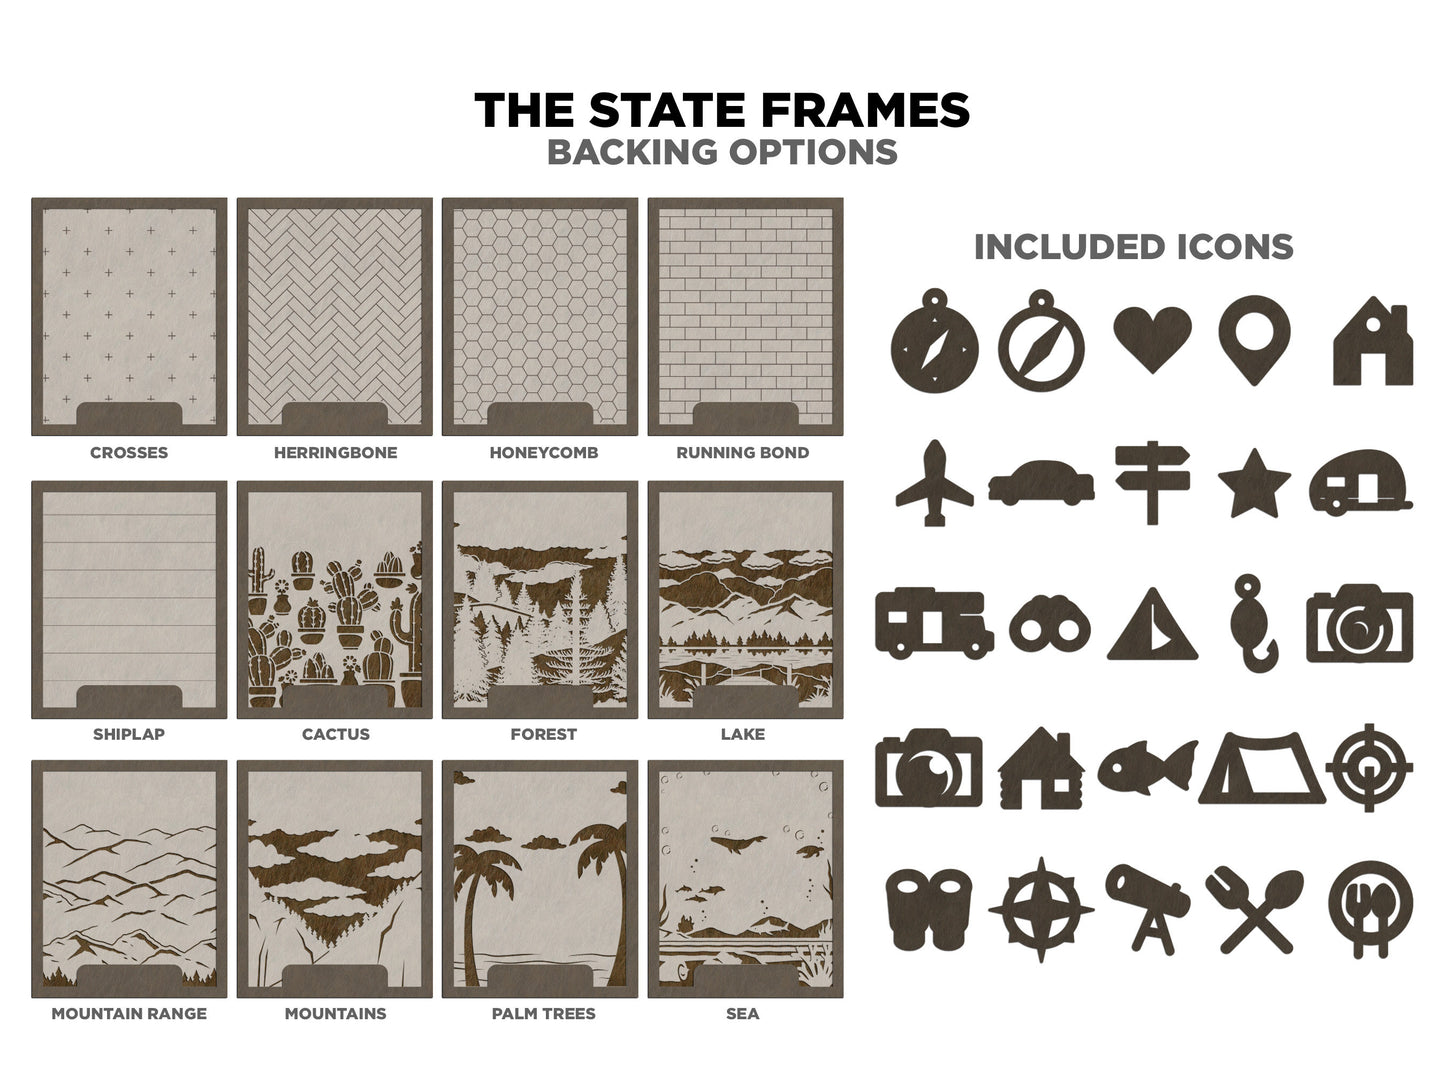 The New York State Frame - 13 text options, 12 backgrounds, 25 icons Included - Make over 7,500 designs - Glowforge & Lightburn Tested